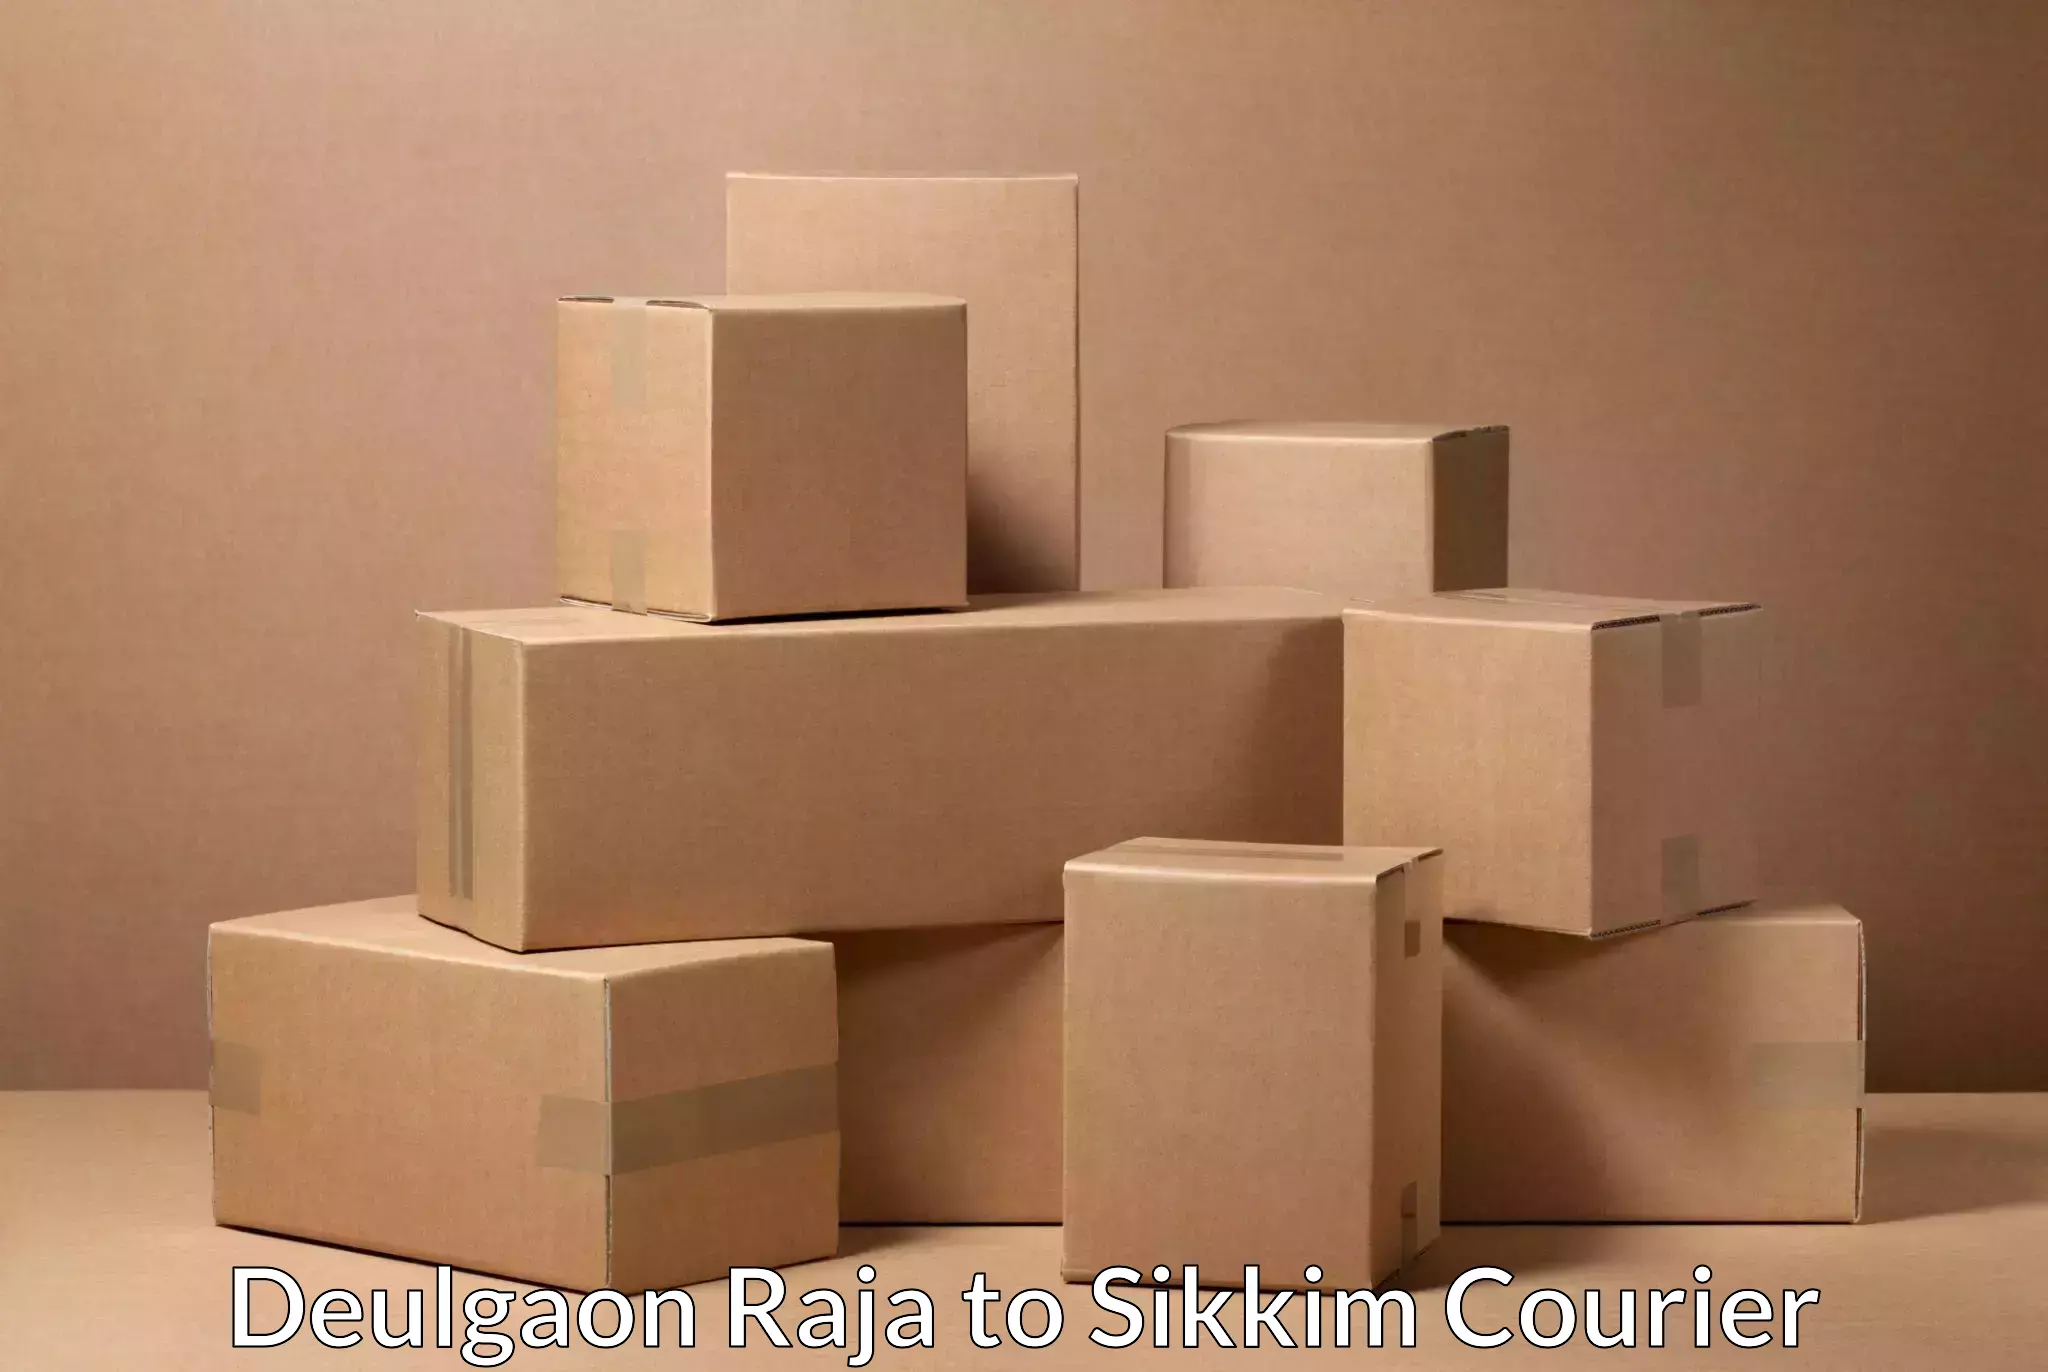 Online courier booking Deulgaon Raja to North Sikkim